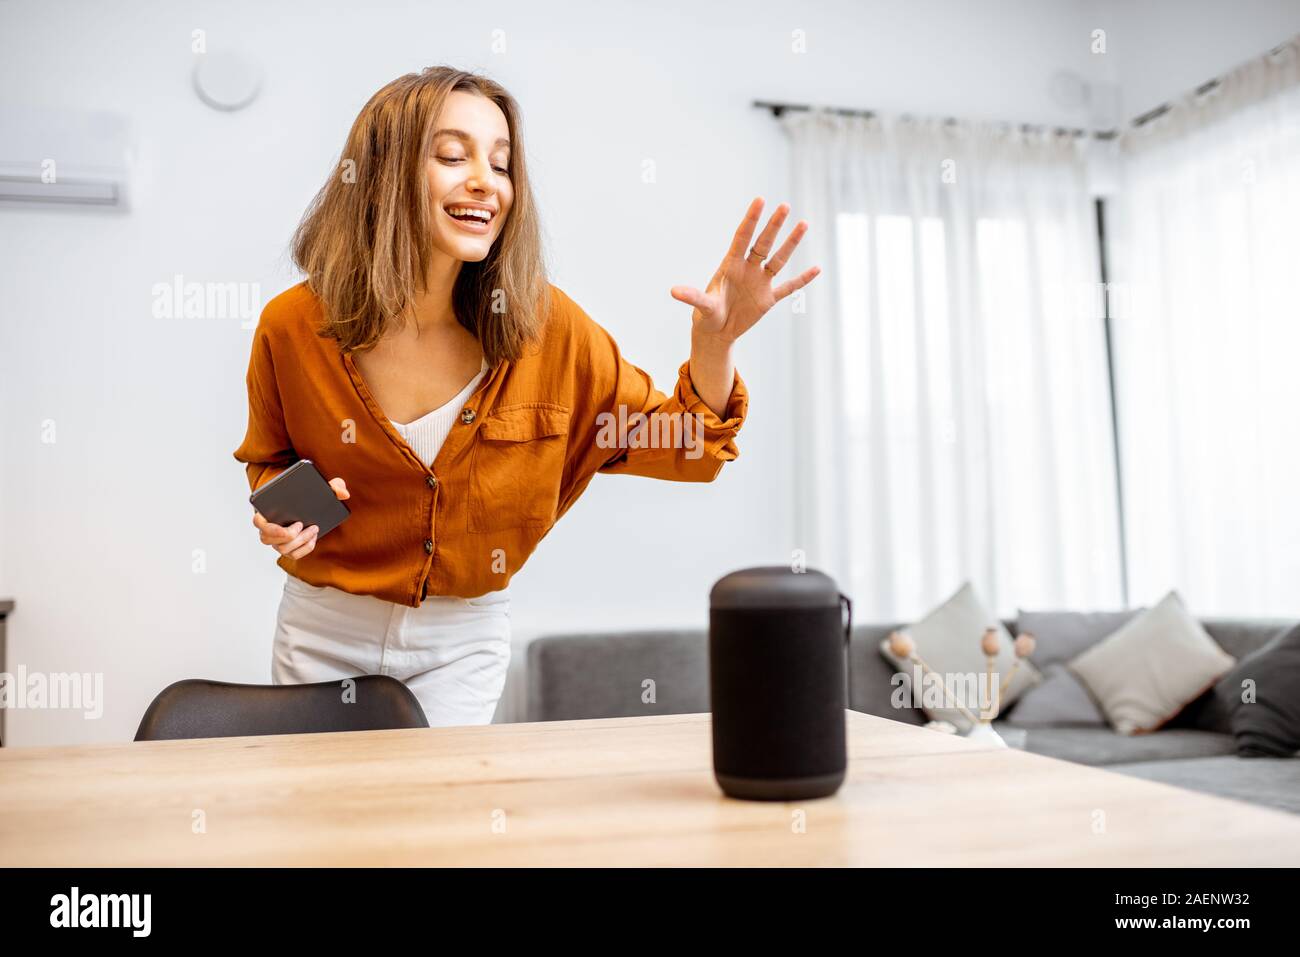 Young cheerful woman controlling home devices with a voice commands, talking to a smart column at home. Concept of smart home and voice command control Stock Photo